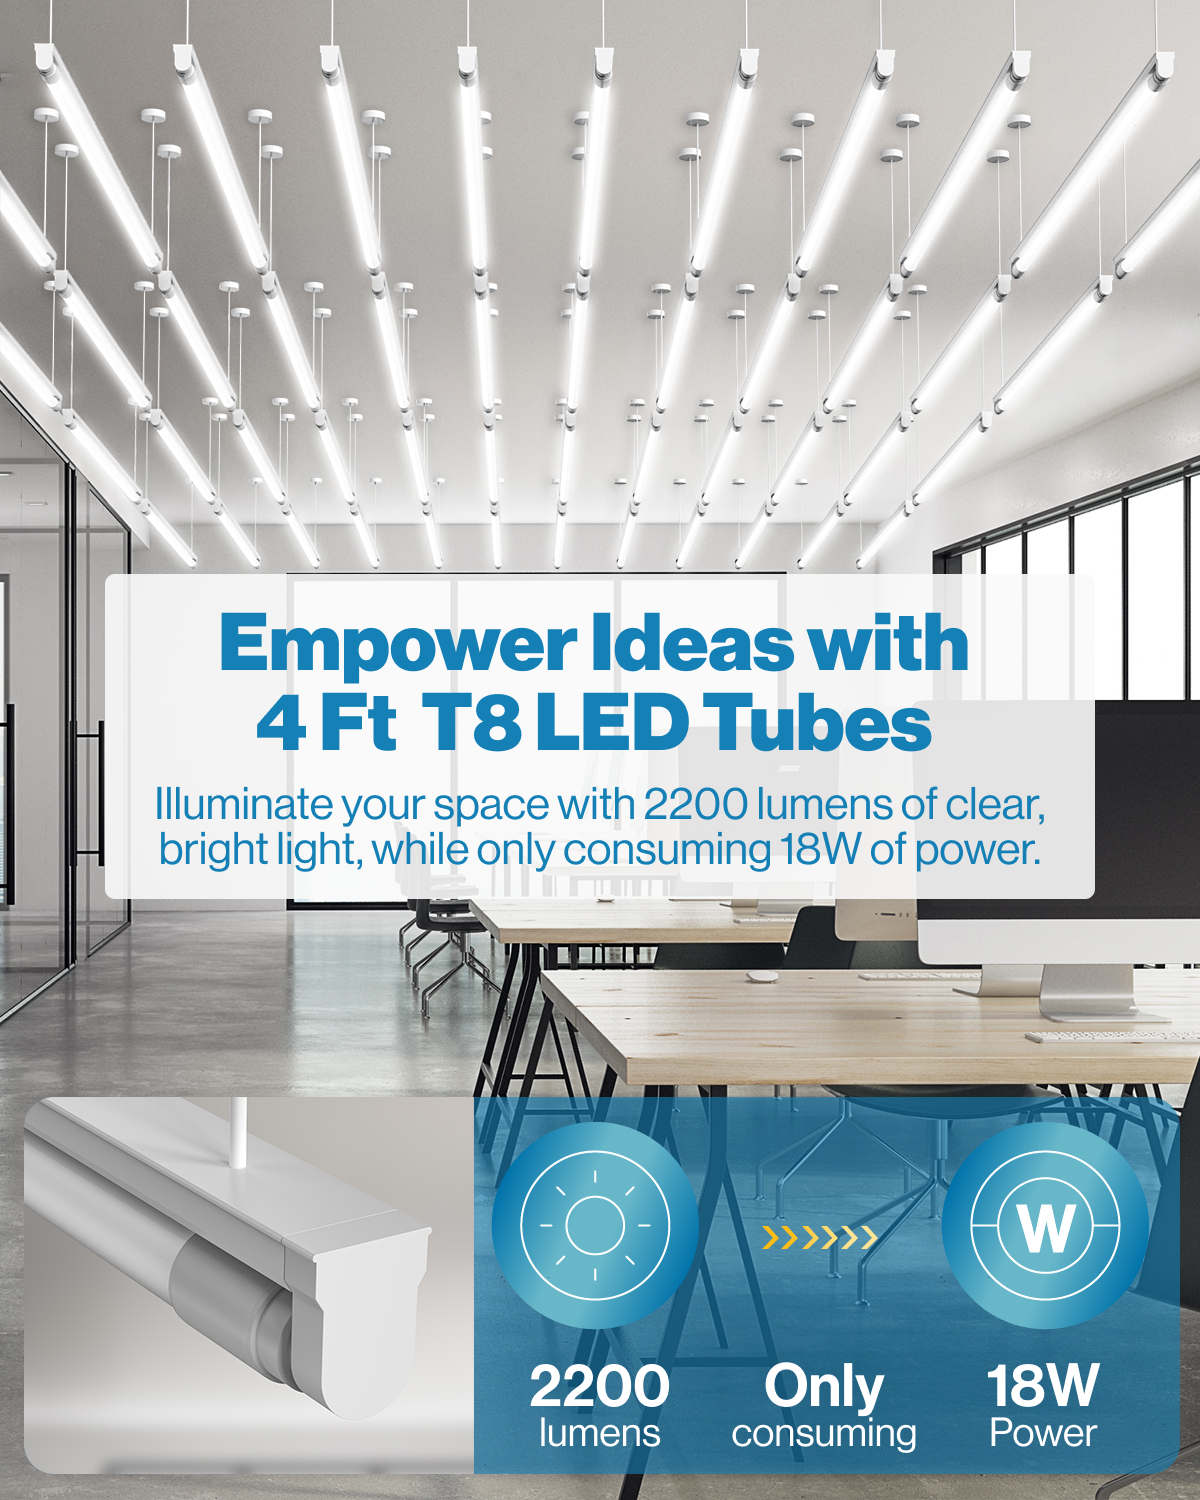 Ended Power: length: 4ft or 48-inches, diameter: approximately 1.12-inches. Includes a G13 Base and is a compatible LED replacement for T8, T10, T12 tubes. With an easy install you can convert to LED for instant energy savings (up to 85%). 1 LED tube equals 2 fluorescent tubes with a 18W LED and a 40W fluorescent. In addition, these tubes are instant on for immediate bright light.